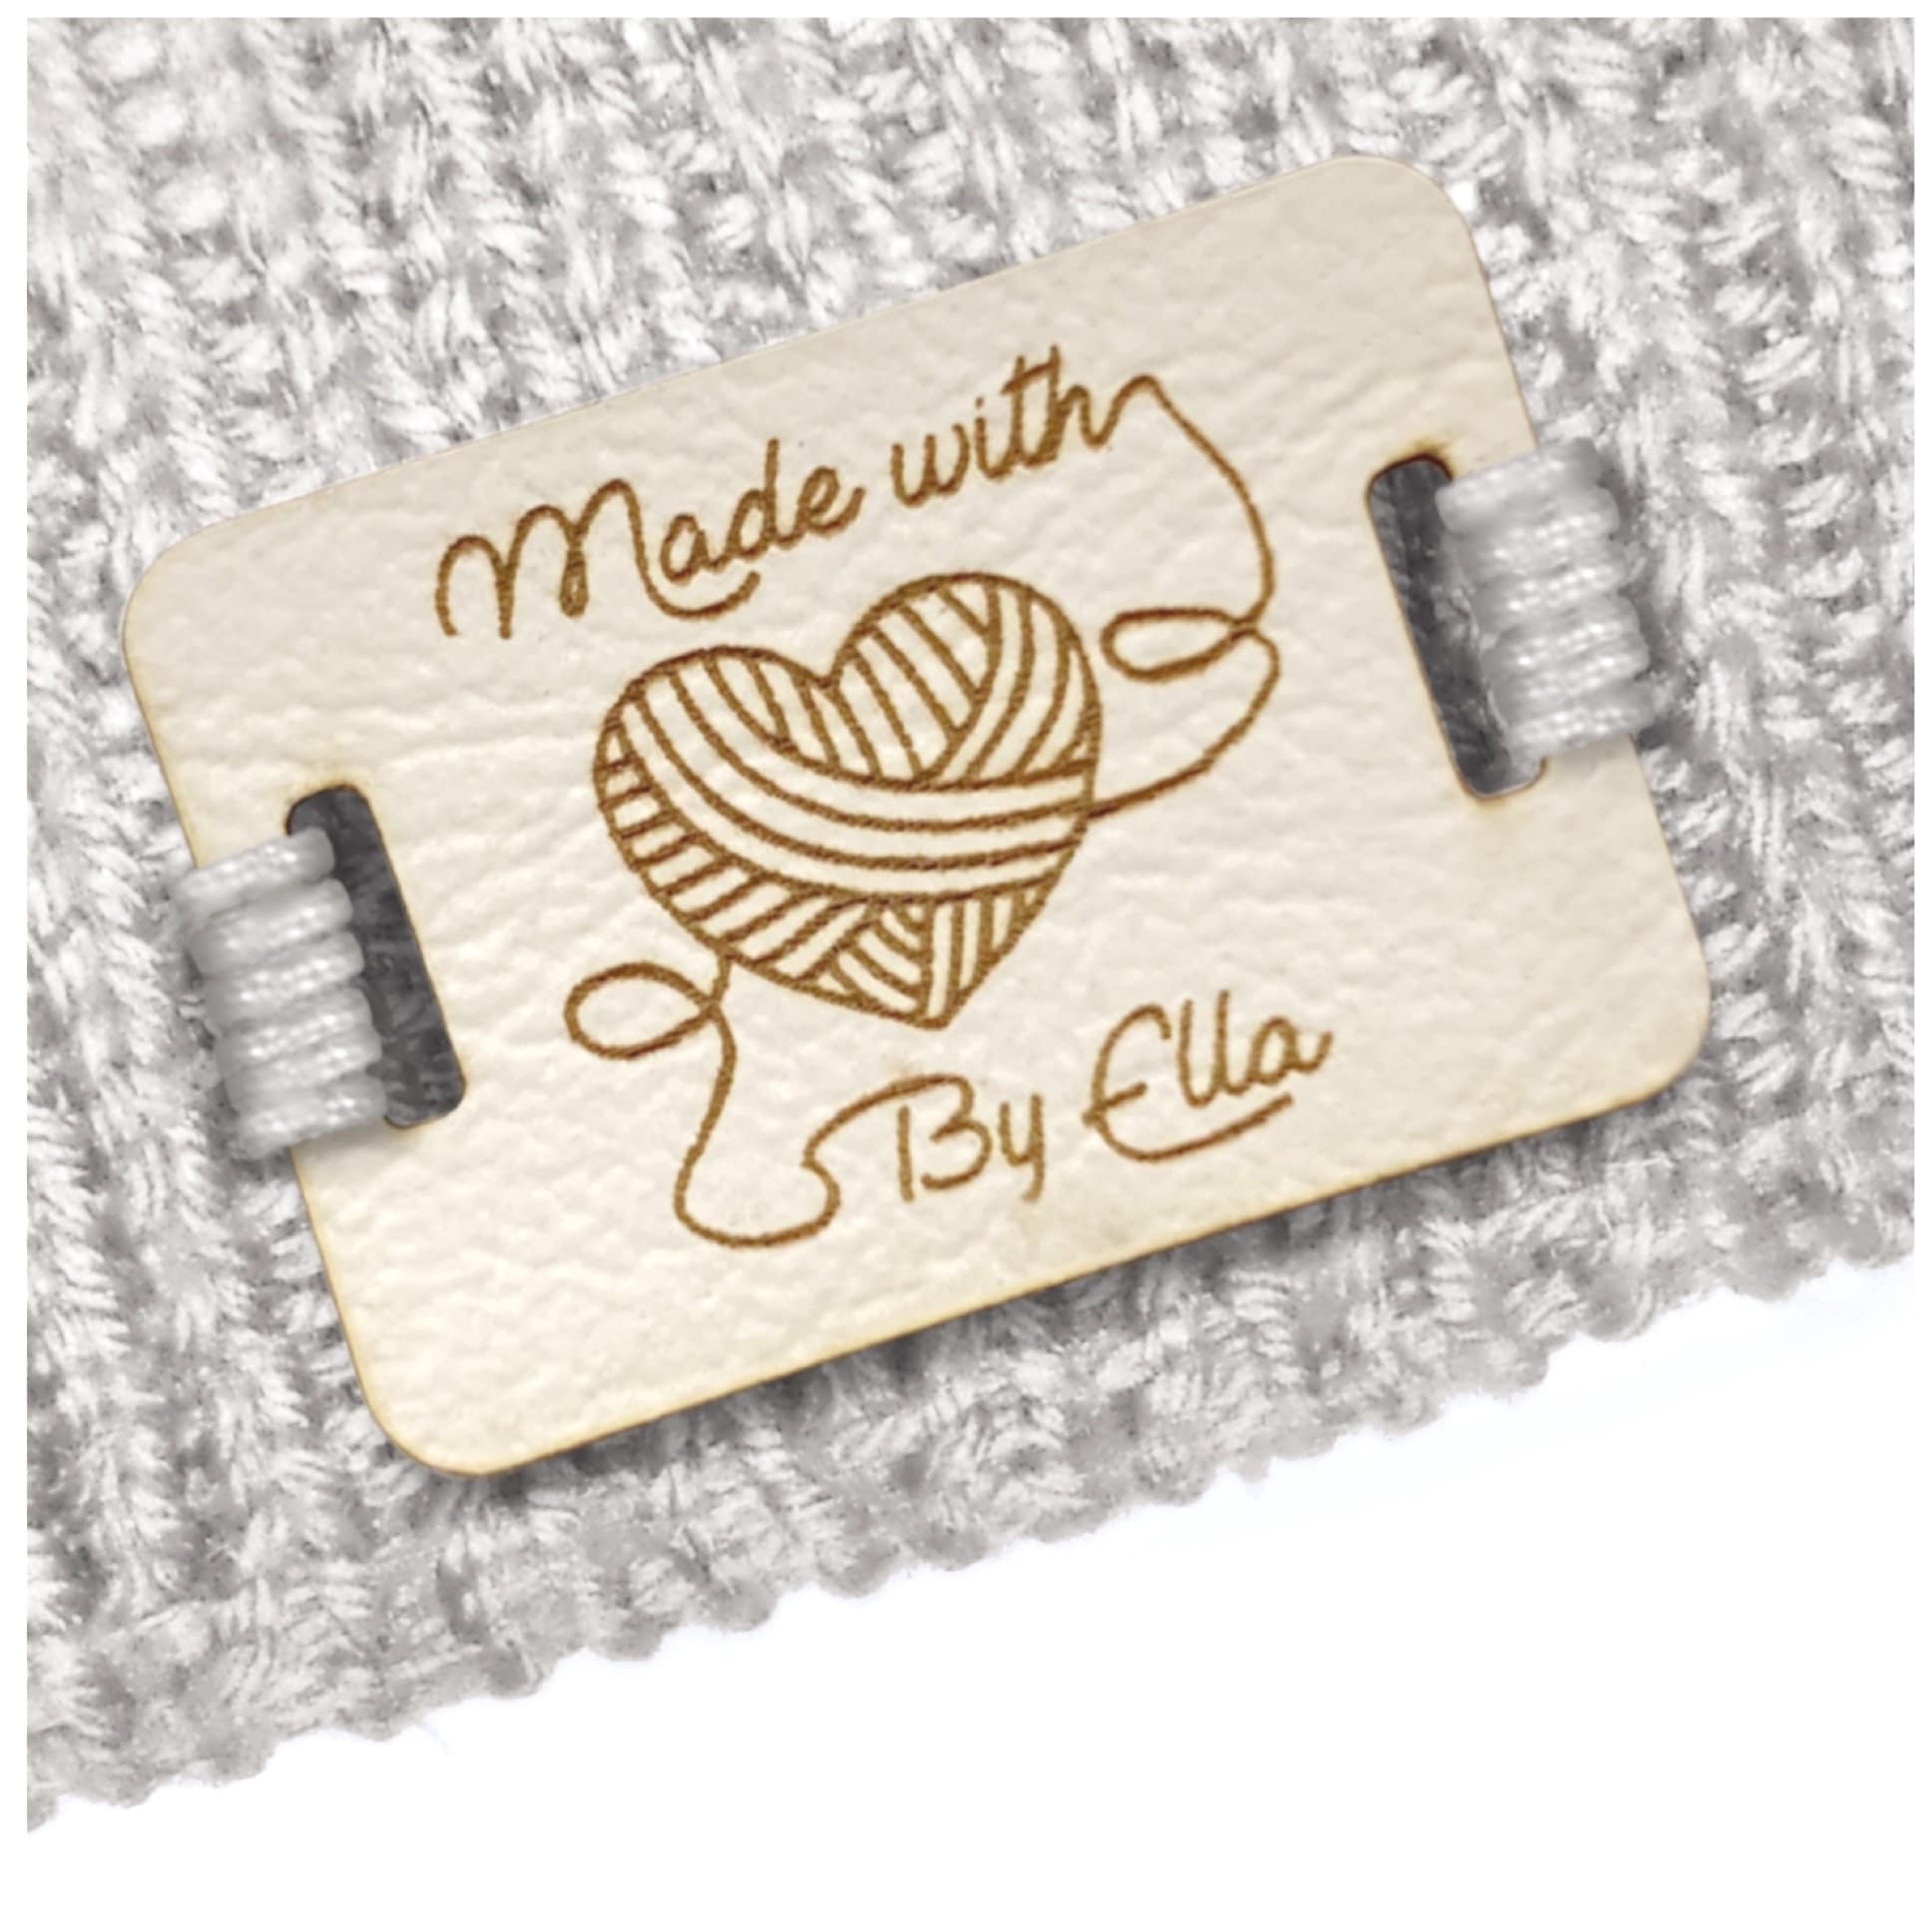 Product Tags for Handmade Items With Love by add Your Name Personalised  Custom 25mm X 50mm 023FO Sewing Knitted Crochet Macrame 